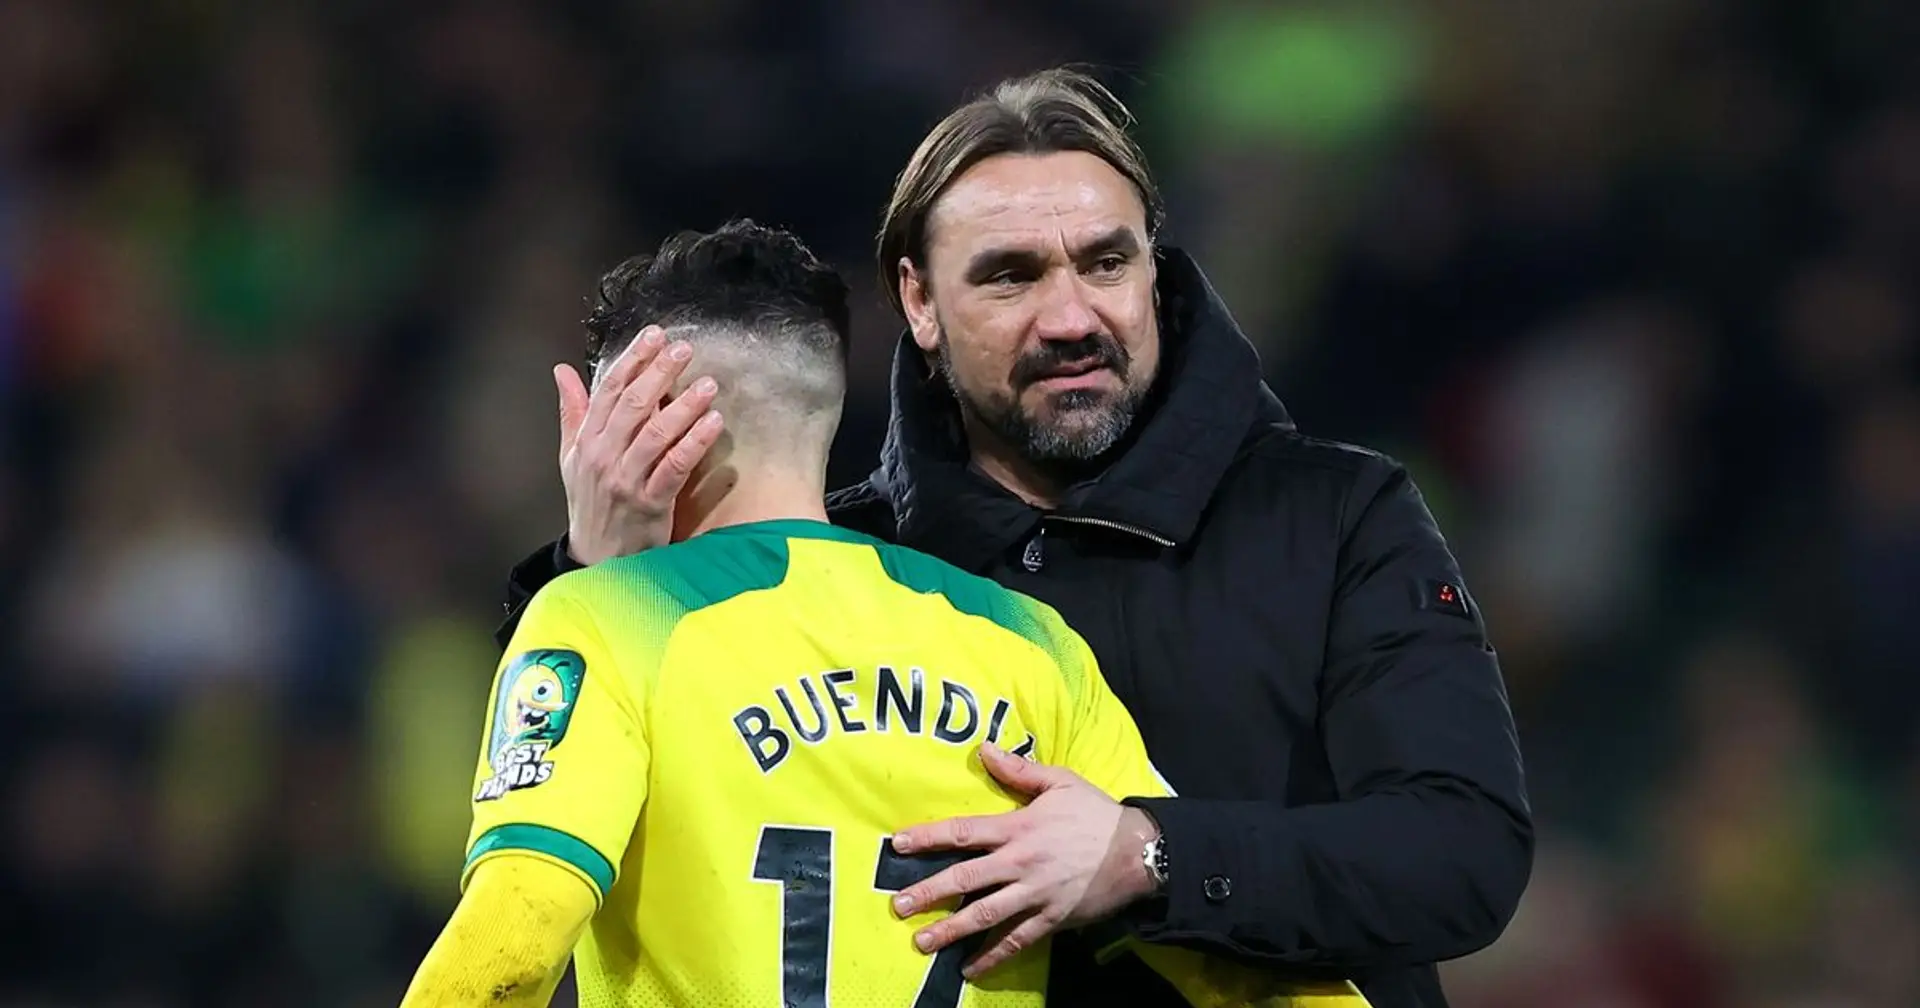 'He is totally committed to us': Norwich boss comments on rumours linking Emi Buendia to Arsenal